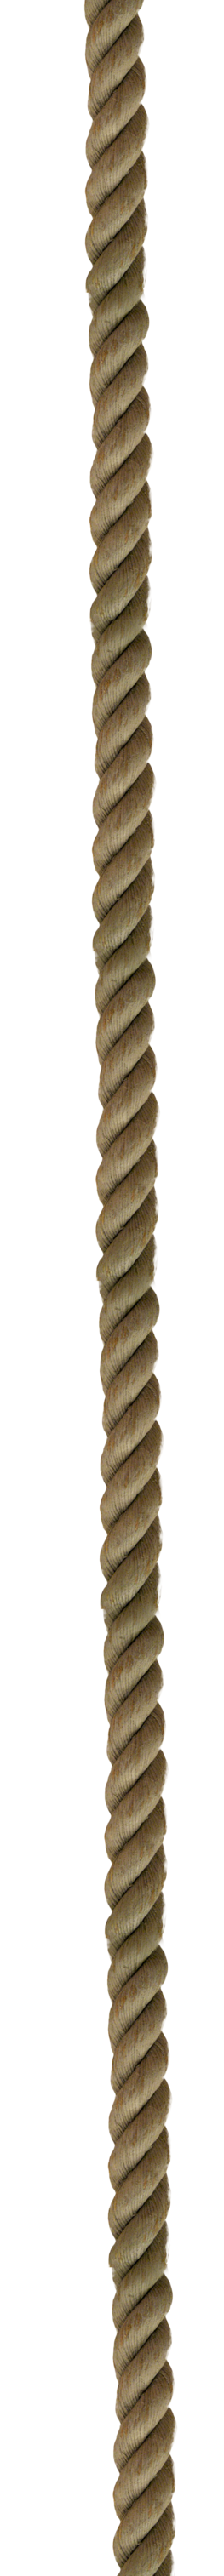 rope PNG transparent image download, size: 263x3027px